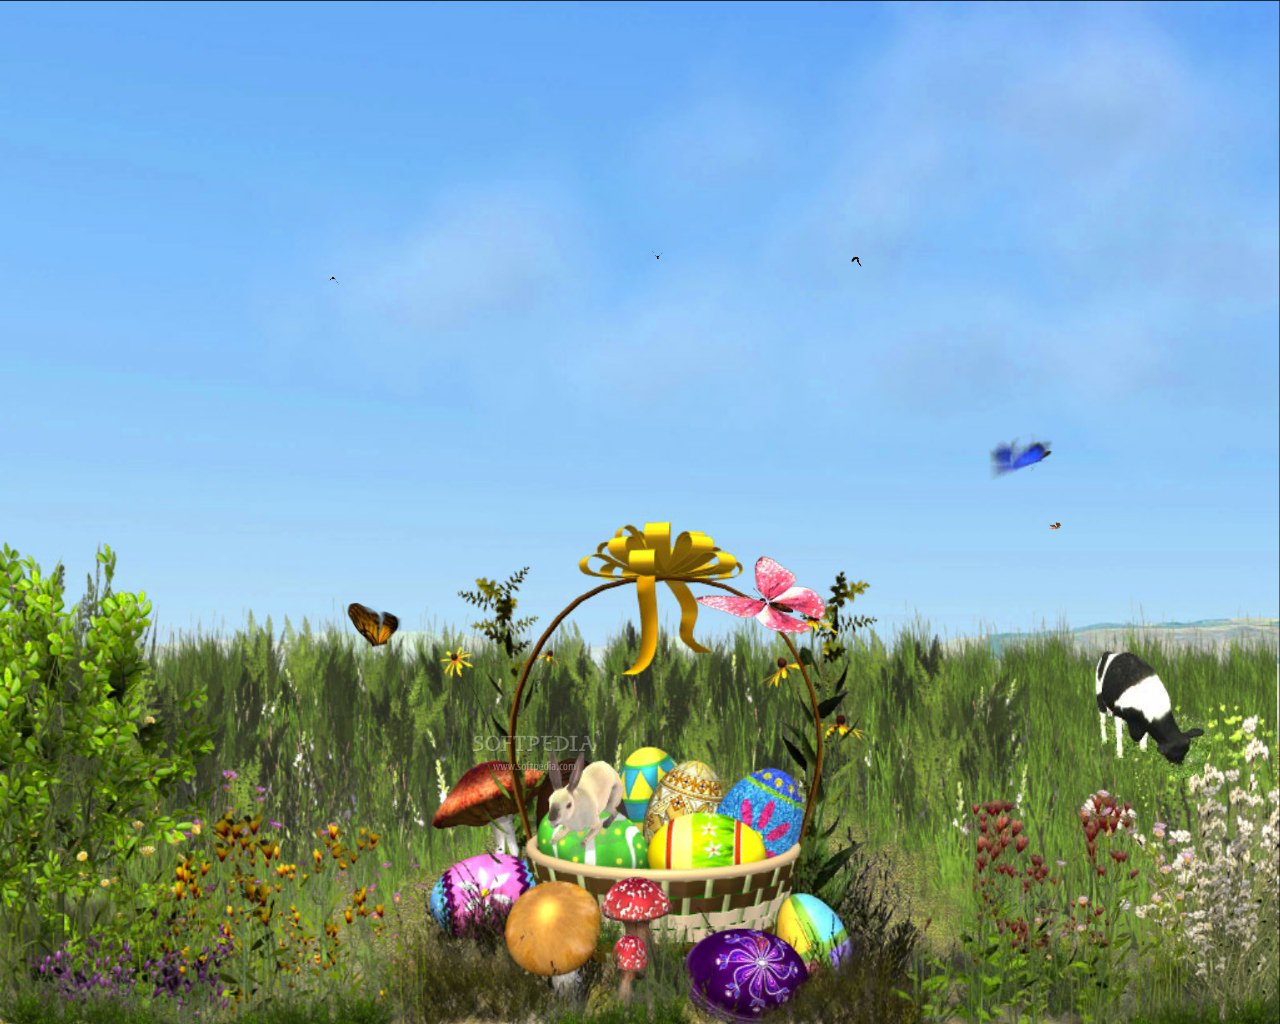 Easter Basket Animated Wallpaper This Is The Image Displayed By